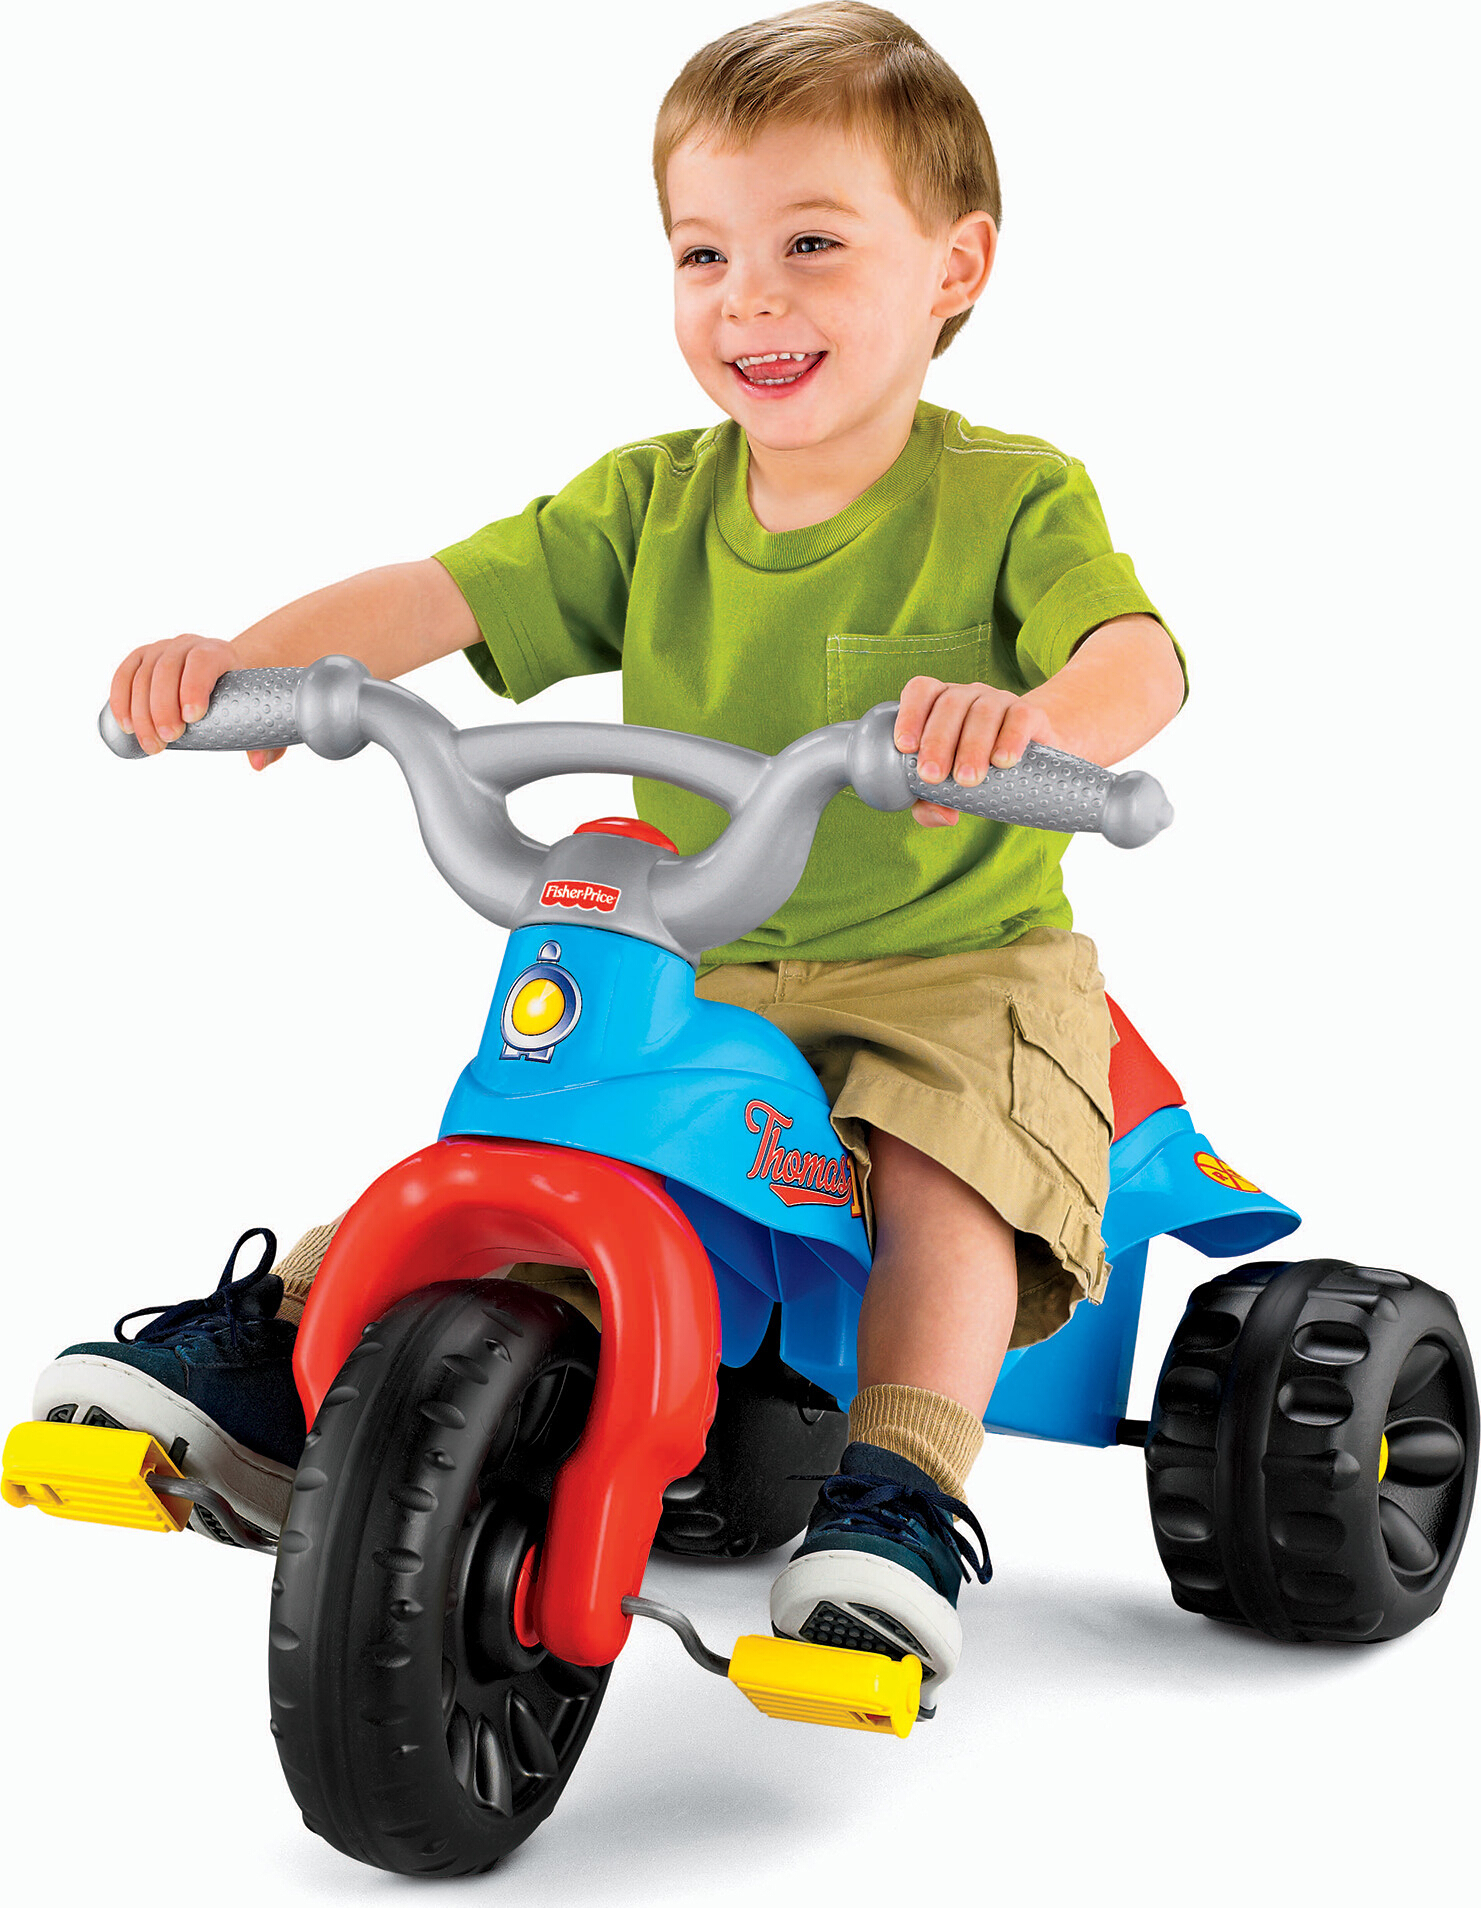 Thomas & Friends Tough Trike Push & Pedal Ride-On Toddler Tricycle - image 2 of 6